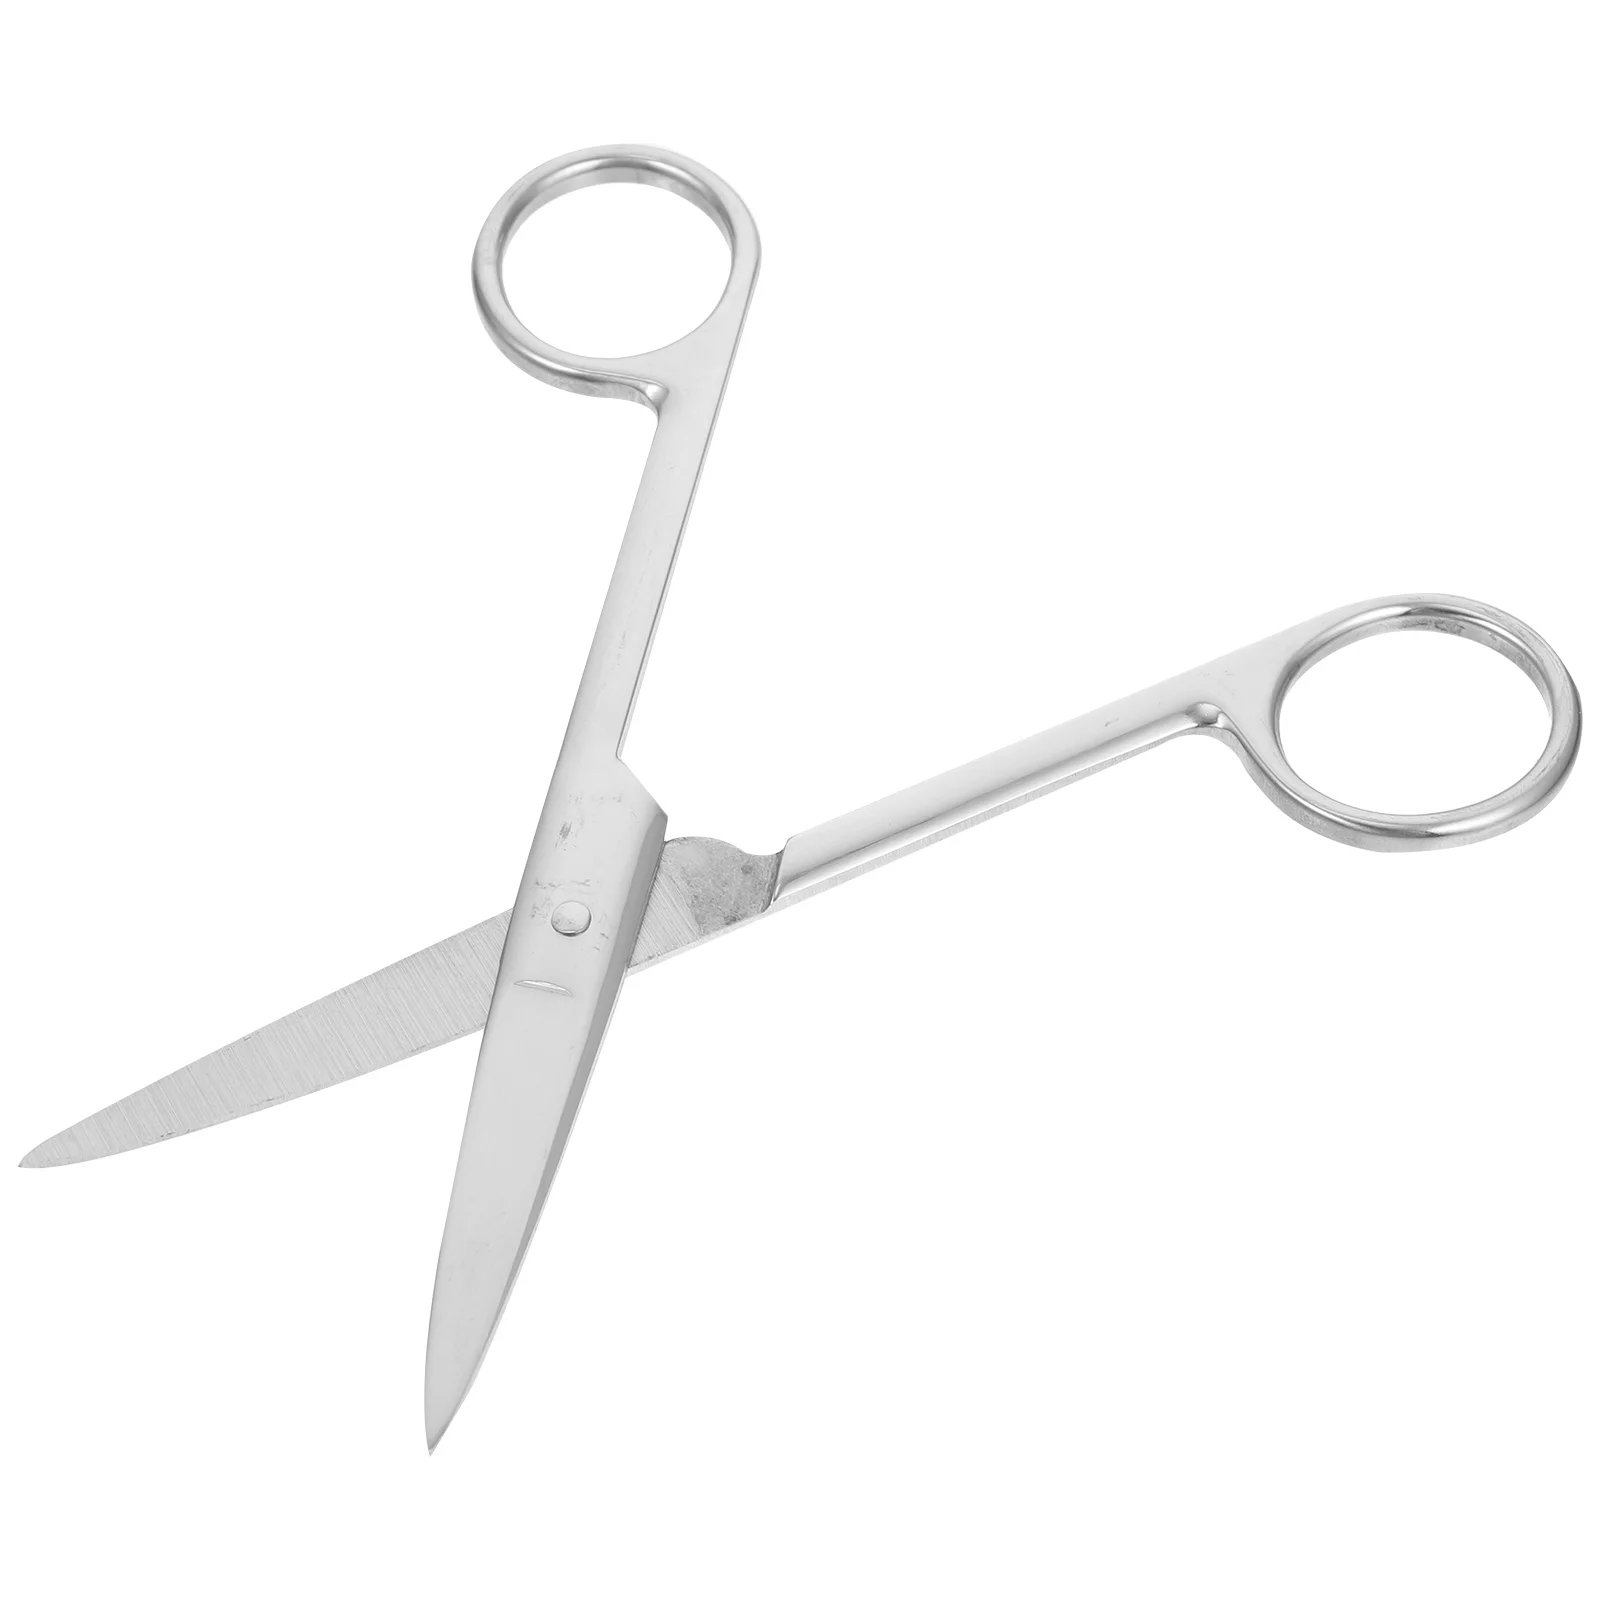 

Scissors Hair Surgical Medical Operating Dissecting Nosesmall Mustache Beard